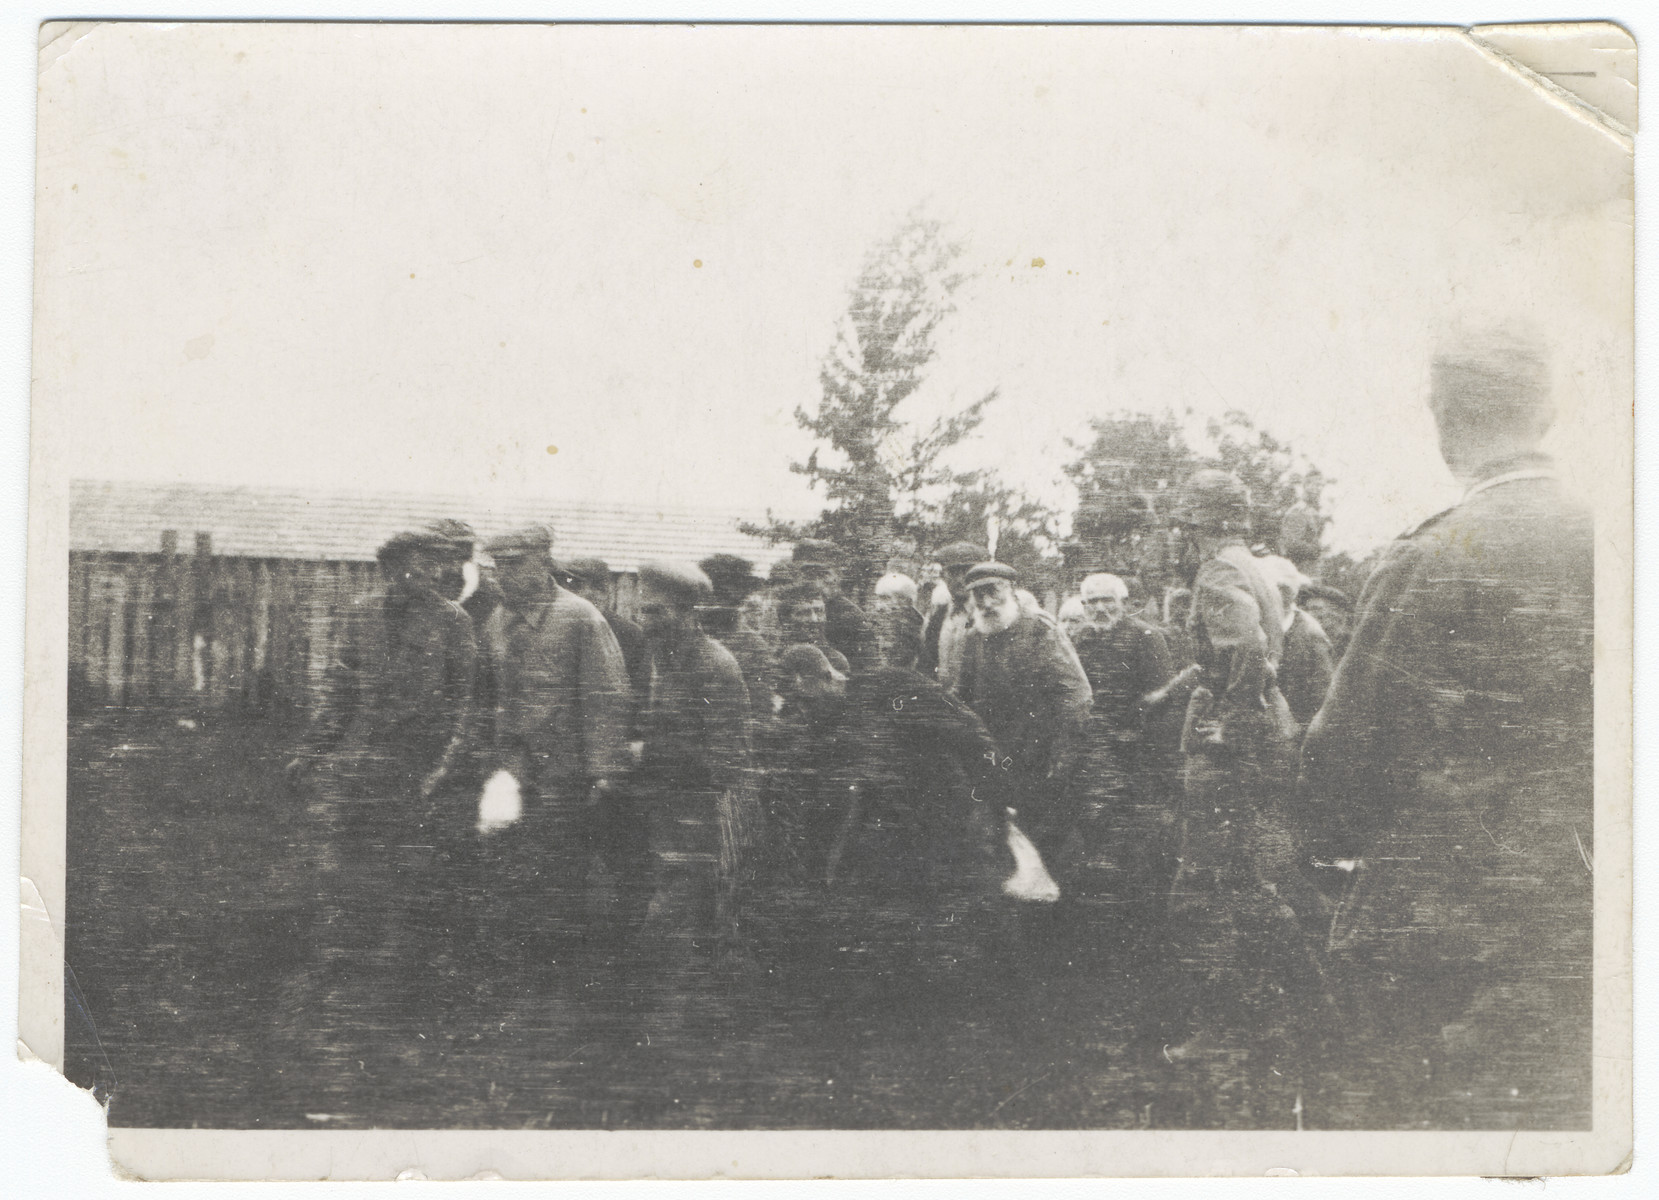 Jewish men from Zhitomir are brought to a cemetery where they would be shot by German troops.

The original caption reads "We had to look as they were shot by ourselves."